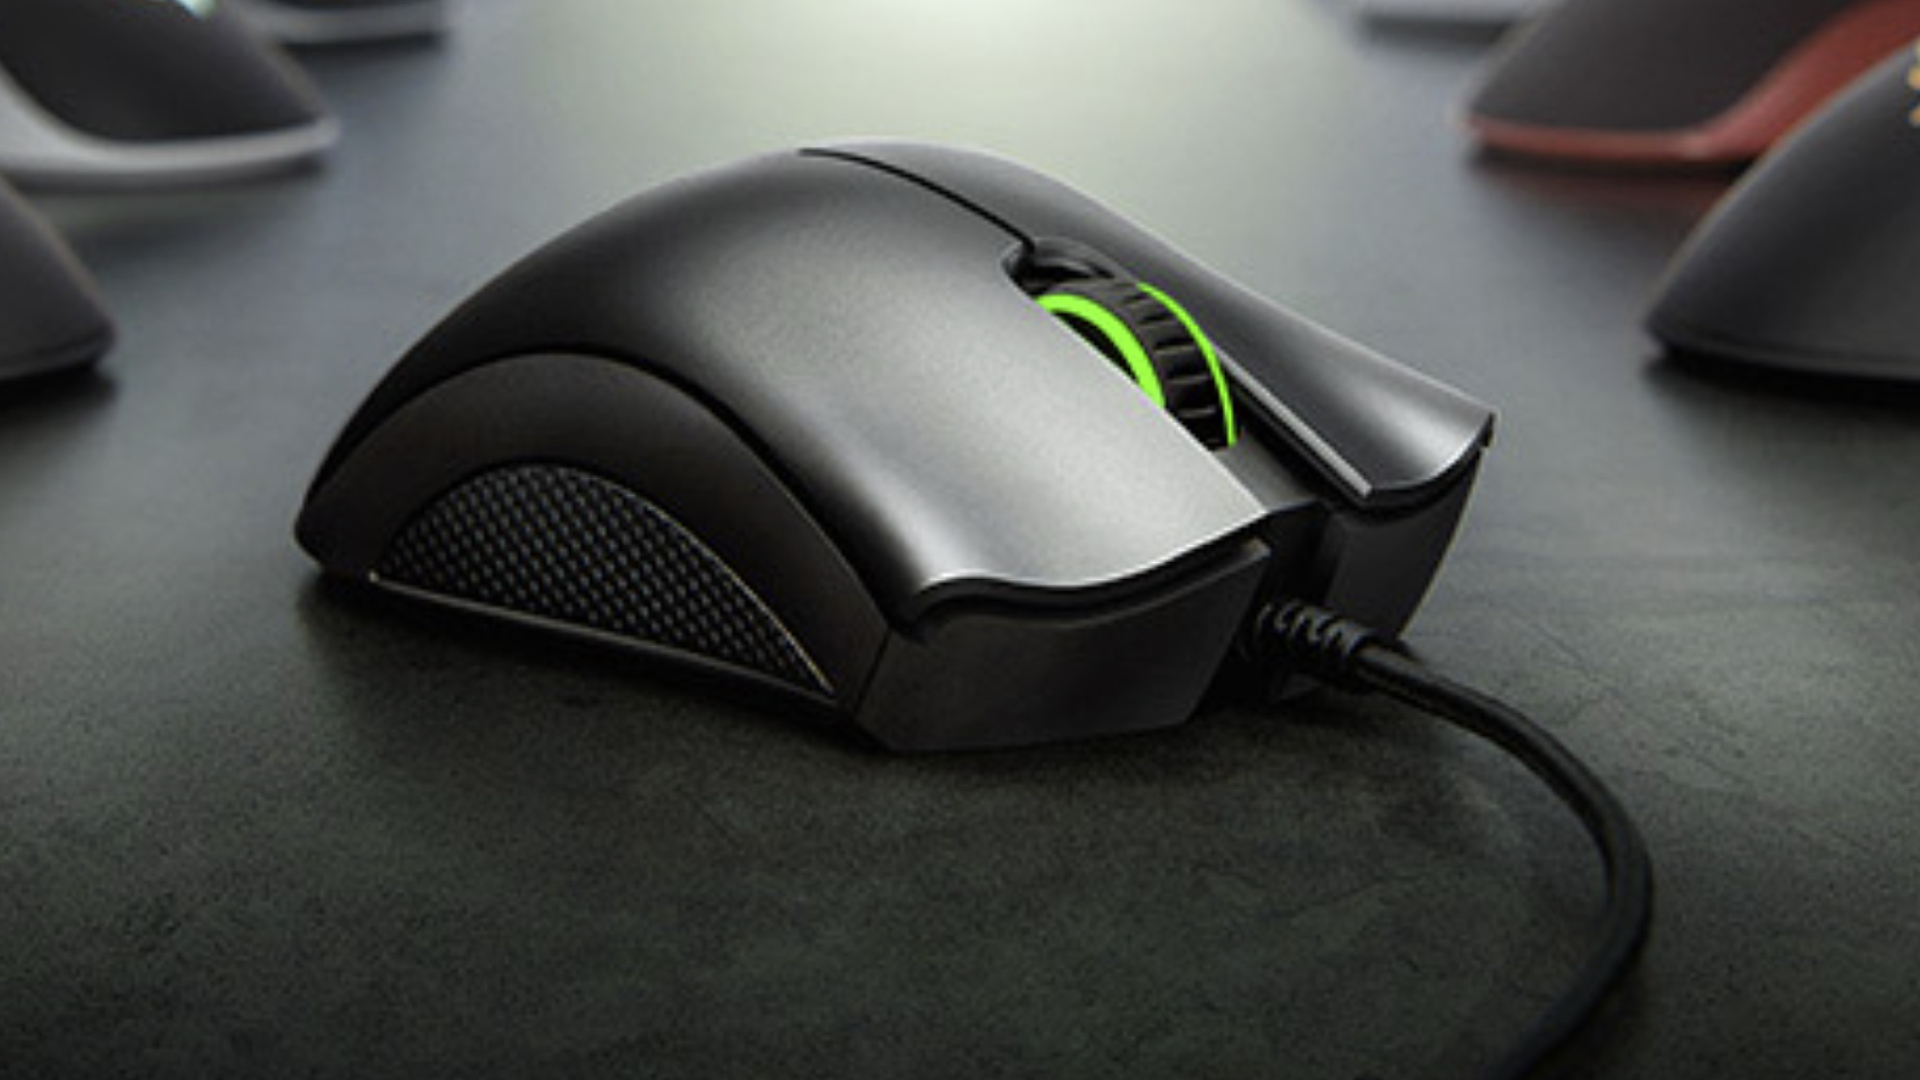 Grab a Razer DeathAdder Essential gaming mouse for under $20